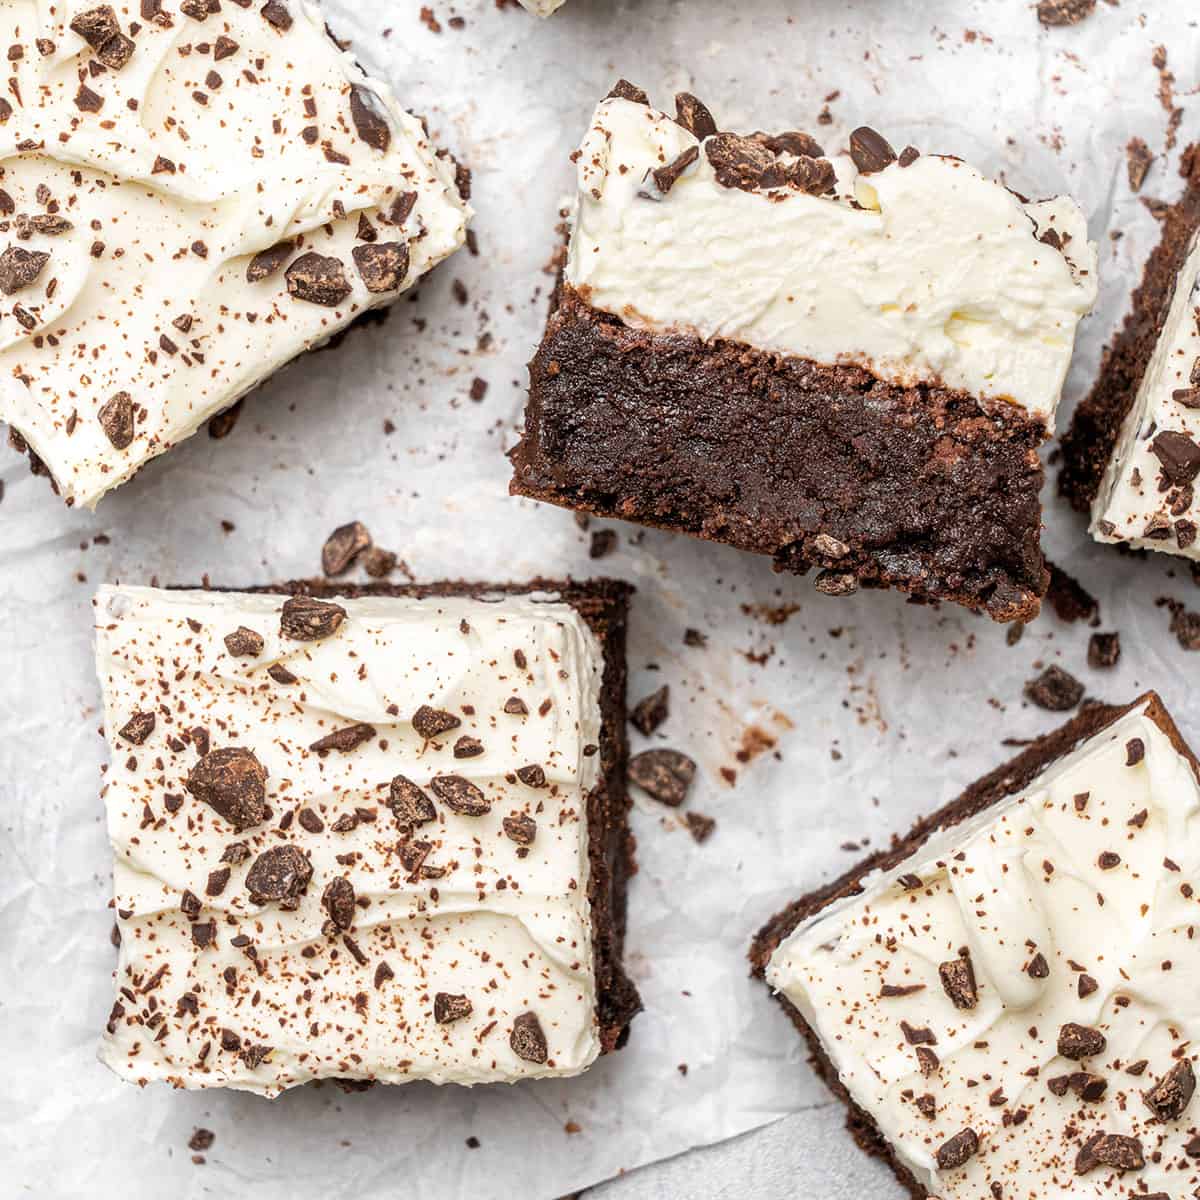 <p>If you're looking for chocolatey addition to your dessert table, you have to try these melt-in-your-mouth <a href="https://www.spatuladesserts.com/brownies-with-cream-cheese-frosting/">brownies with cream cheese frosting</a>! Ready in less than an hour, these moist, gooey brownies are baked to perfection and then topped with a creamy, yet not overly sweet, cream cheese frosting. Serve them alongside a bowl of vanilla ice cream for the perfect after-dinner dessert!</p> <p><strong>Recipe: <a href="https://www.spatuladesserts.com/brownies-with-cream-cheese-frosting/">Brownies with cream cheese frosting</a></strong></p>